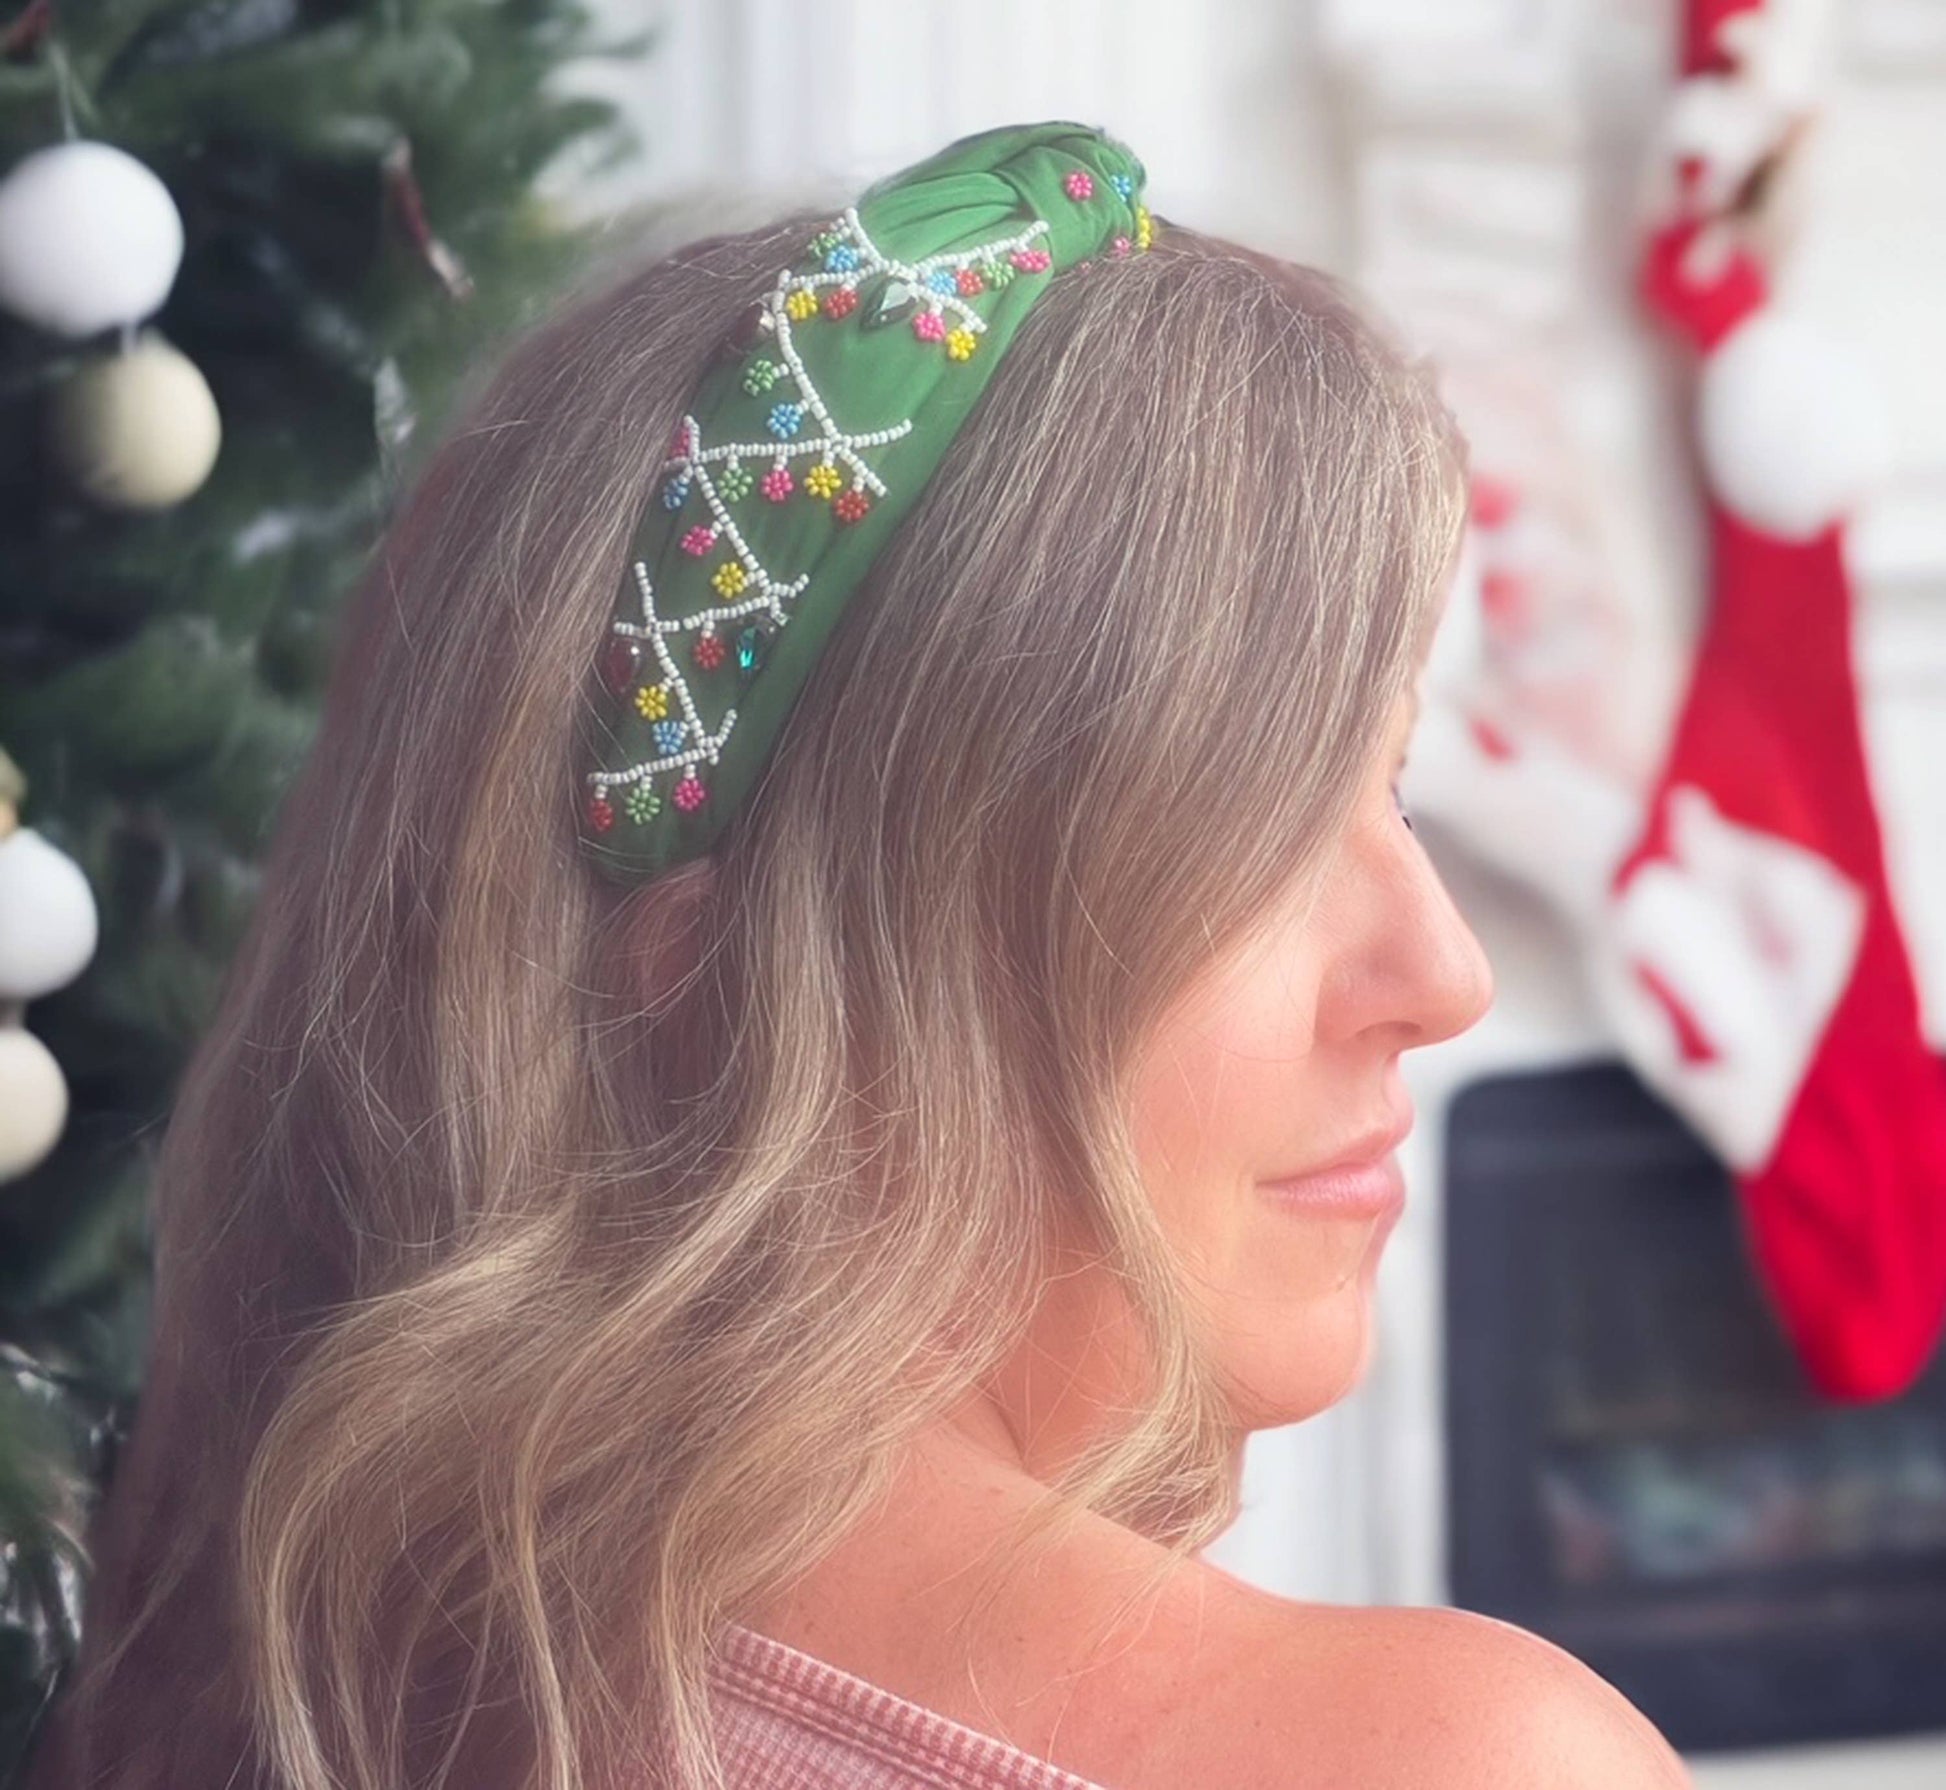 A Bash woman wearing a Festive Beaded Christmas Headband in front of a Christmas tree.